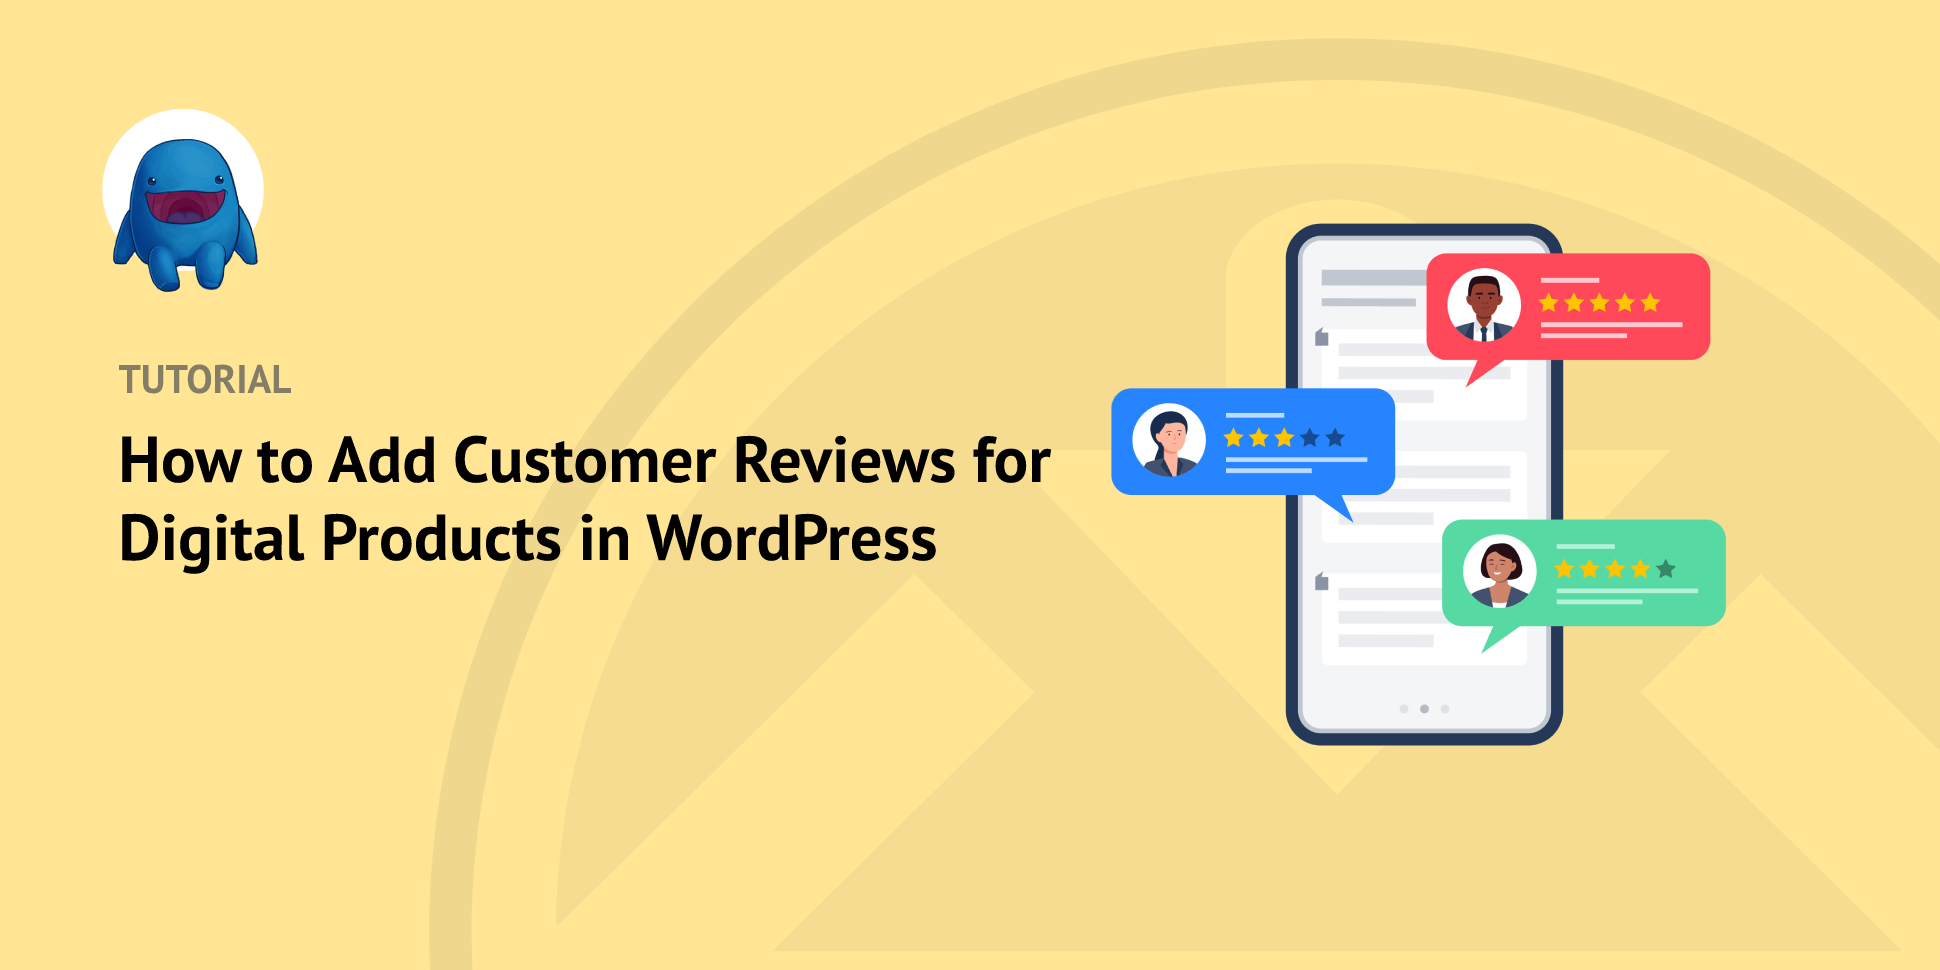 How to Add Customer Reviews for Digital Products in WordPress